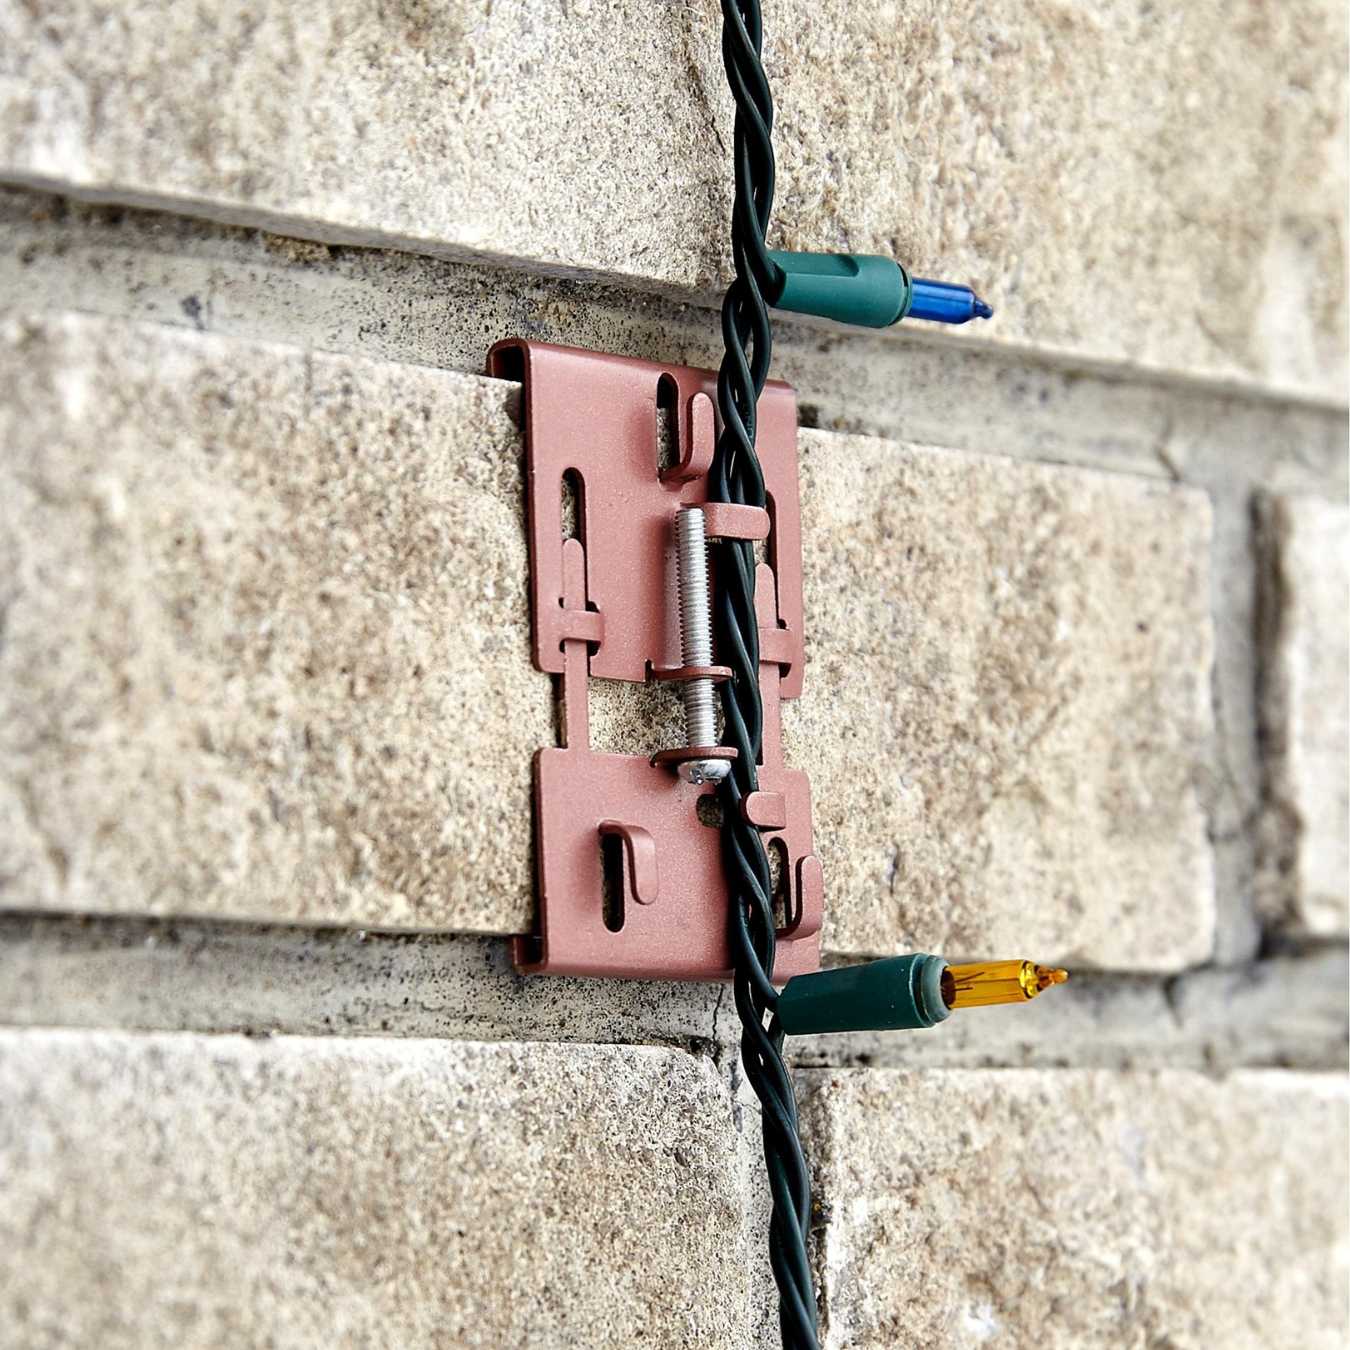 How To Attach Wire To Brick Wall